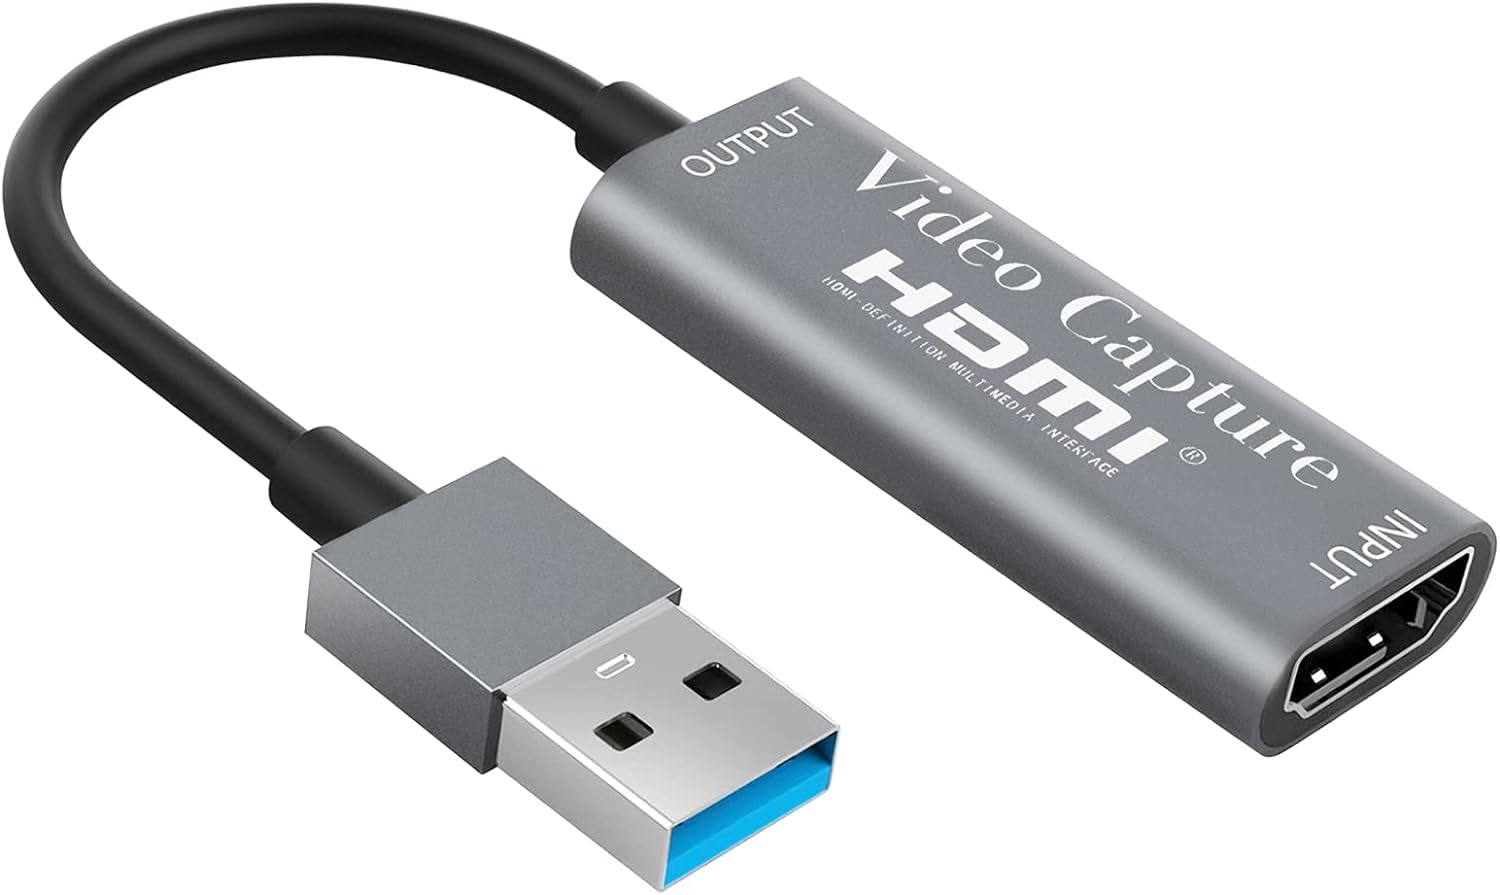 10 Best Capture Card For Ps3 for 2023